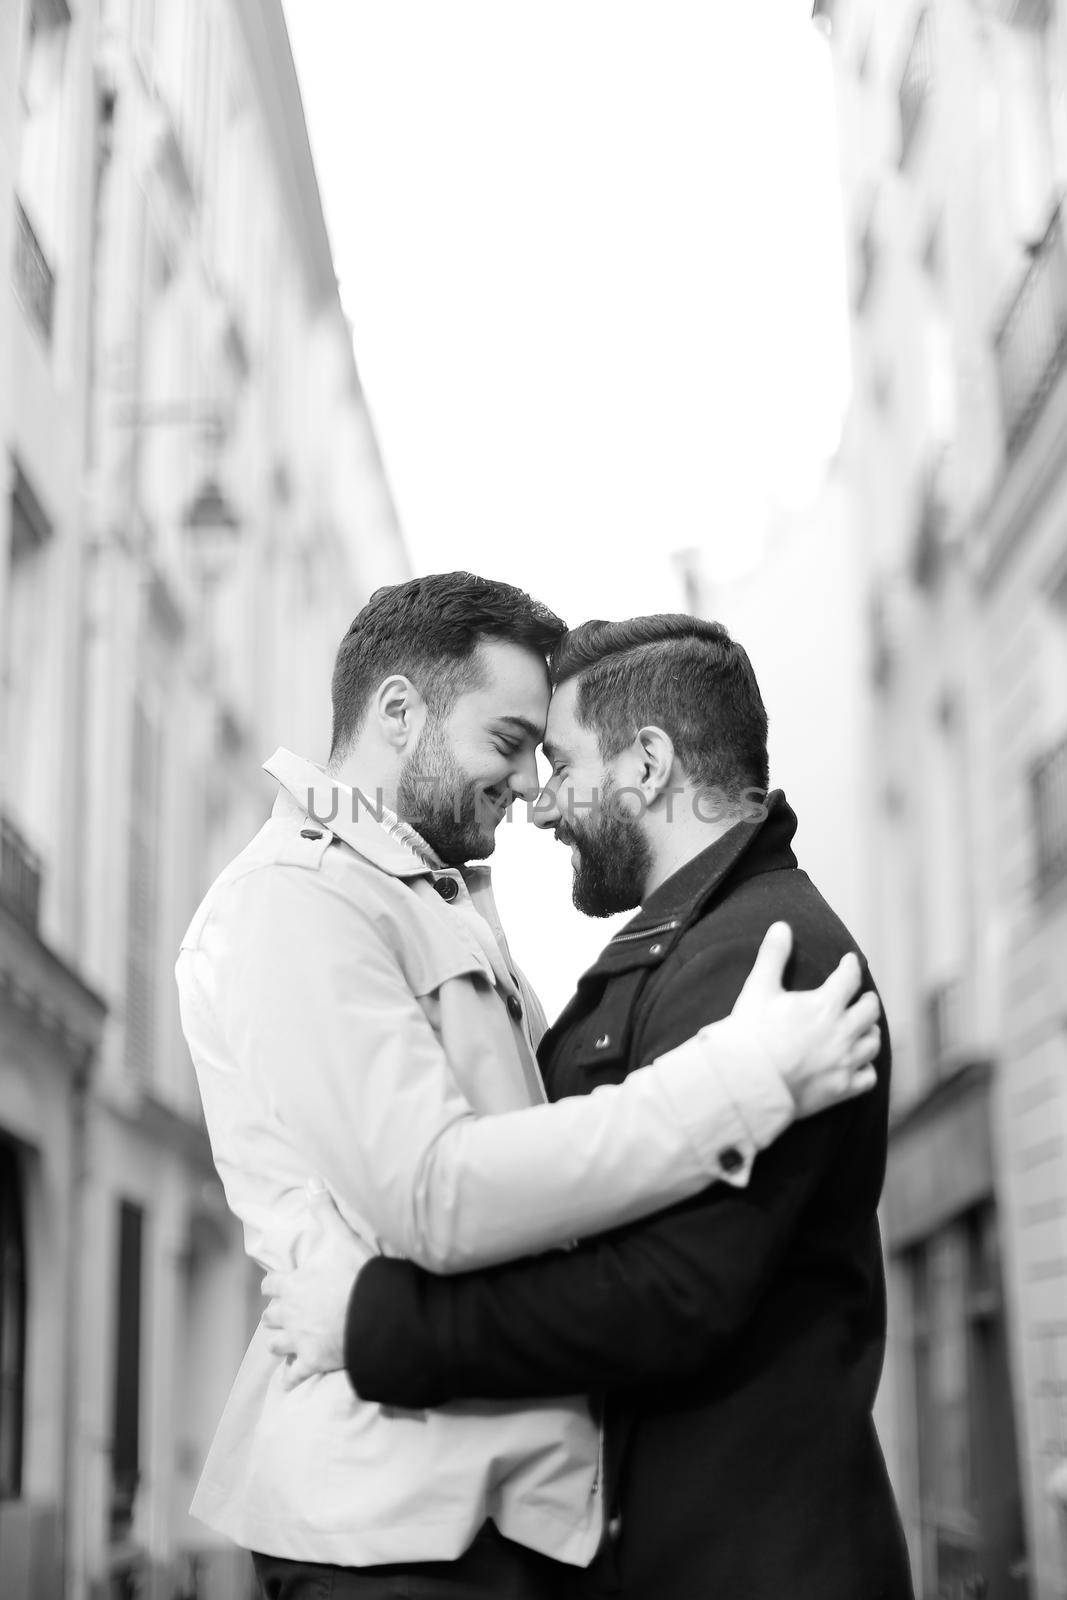 Black and white photo of two hugging gays in city, buildings i background. Concept of same sex couple nad love.